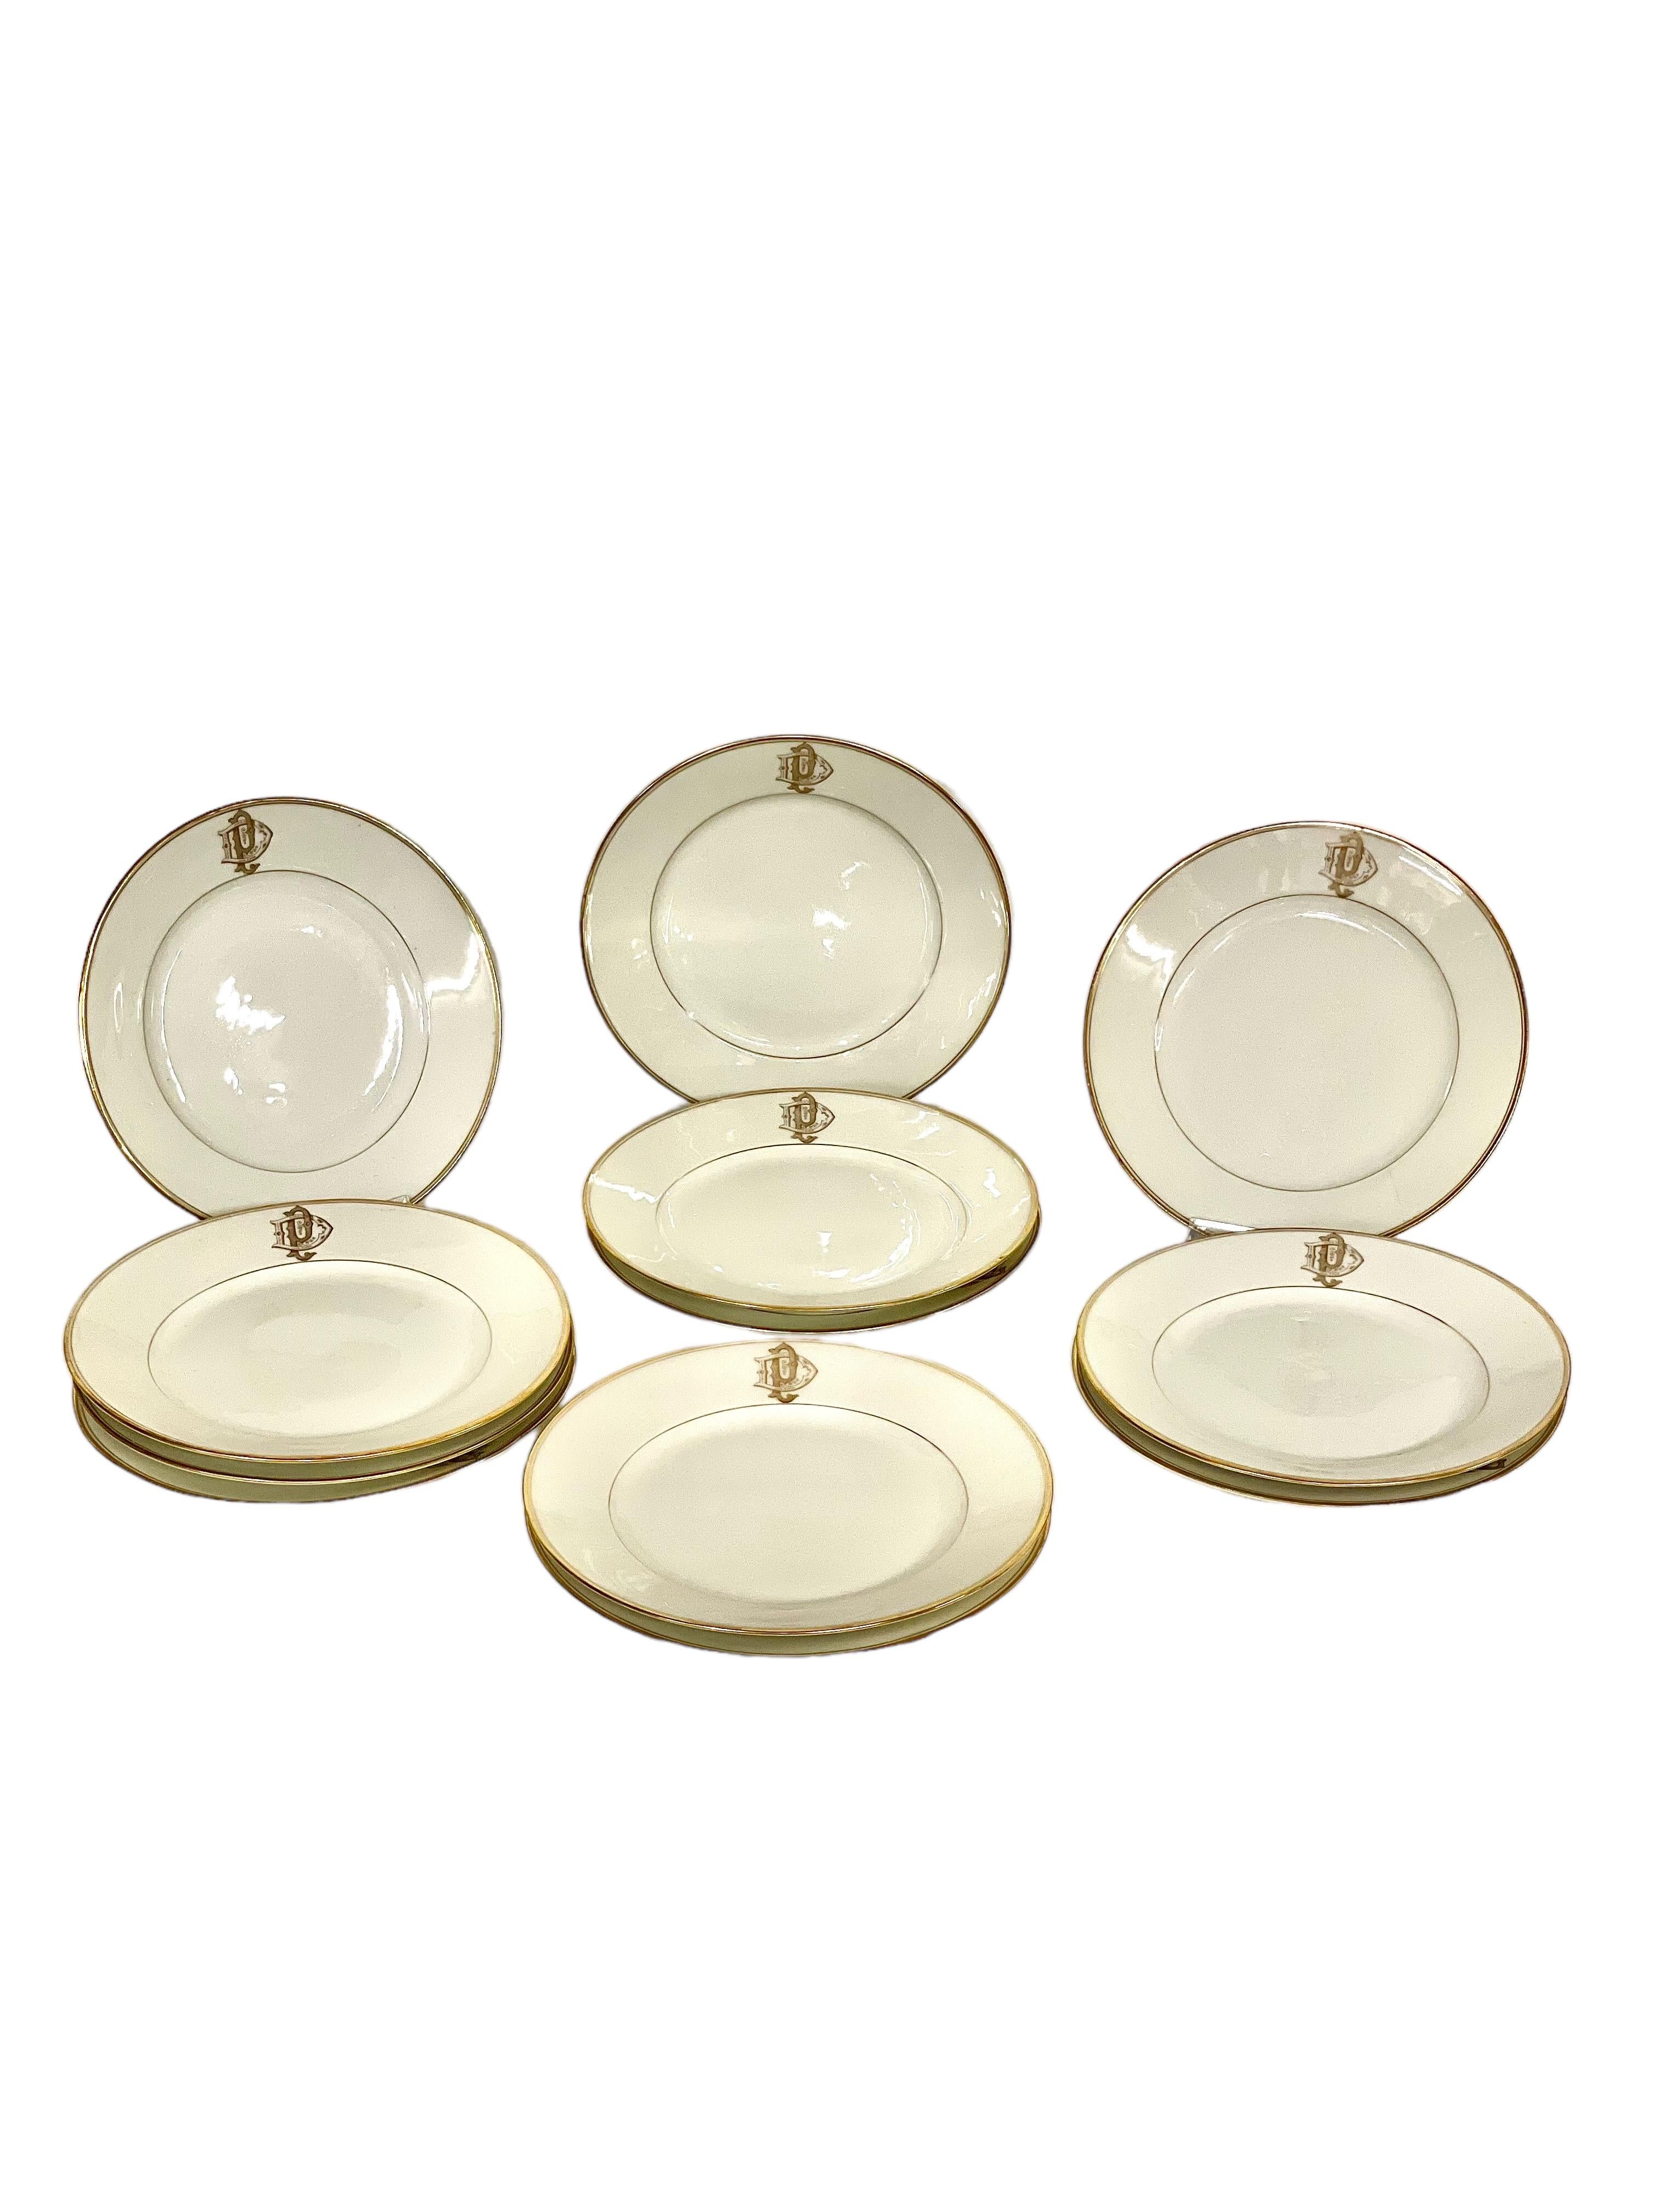 A superb 50-piece dinner service in delicate white Limoges porcelain, each piece edged with a fine rim of gilt, and bearing the elaborately formed monogramme 'DP'. Lids and handles are beautifully embellished, with interesting forms and textured